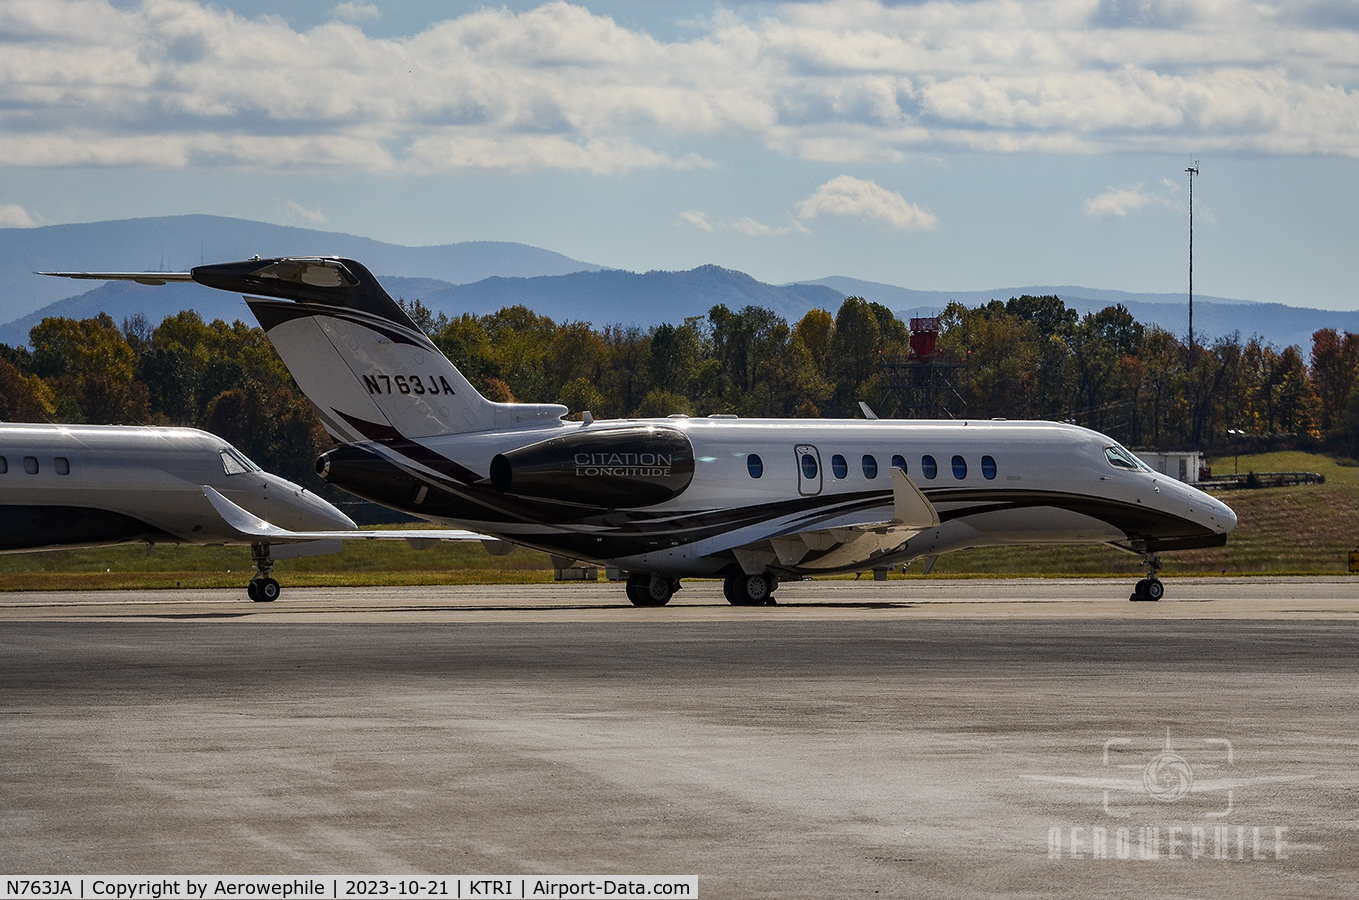 N763JA, 2019 Cessna 700 Citation Longitude C/N 700-0015, Parked on the ramp at Tri-Cities Airport.